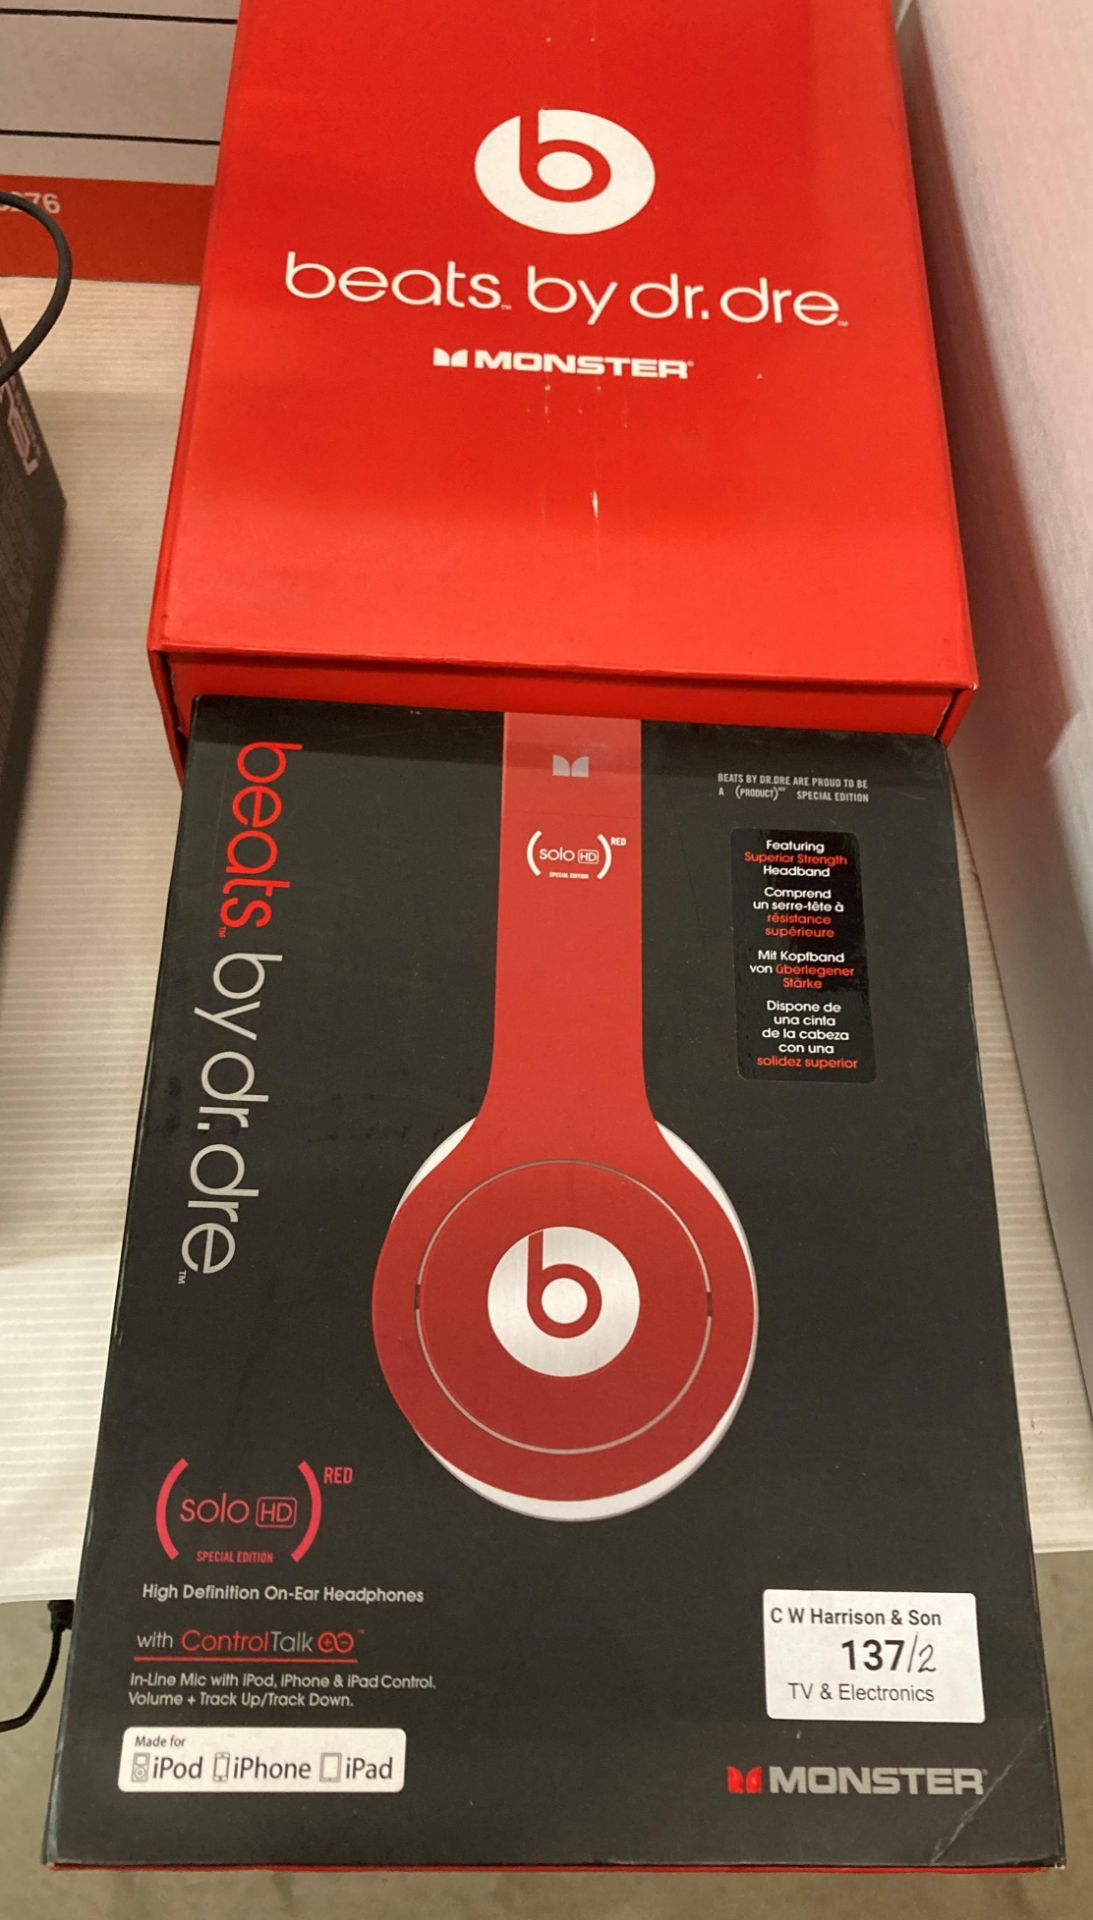 2 x pairs of Beats by Dr Dre Monster headphones (boxed - no chargers) (saleroom location: H10)